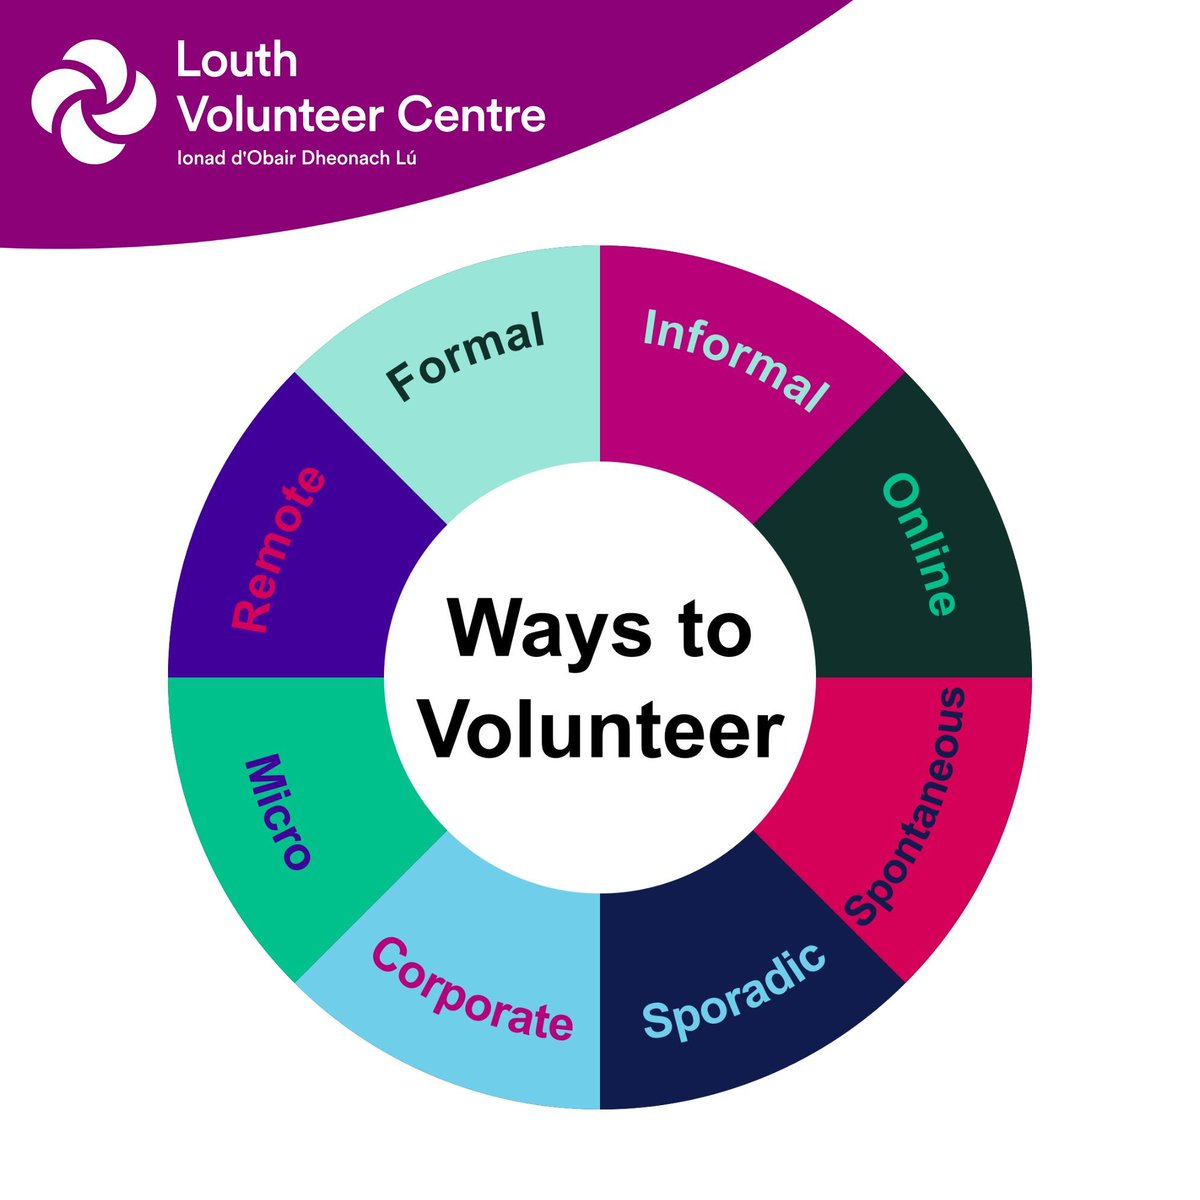 When it comes to volunteering, there are lots of different types and ways that people get involved. The graphic shows a number of different types of volunteering. Click the link to read more about these types of volunteering buff.ly/3r16vsR